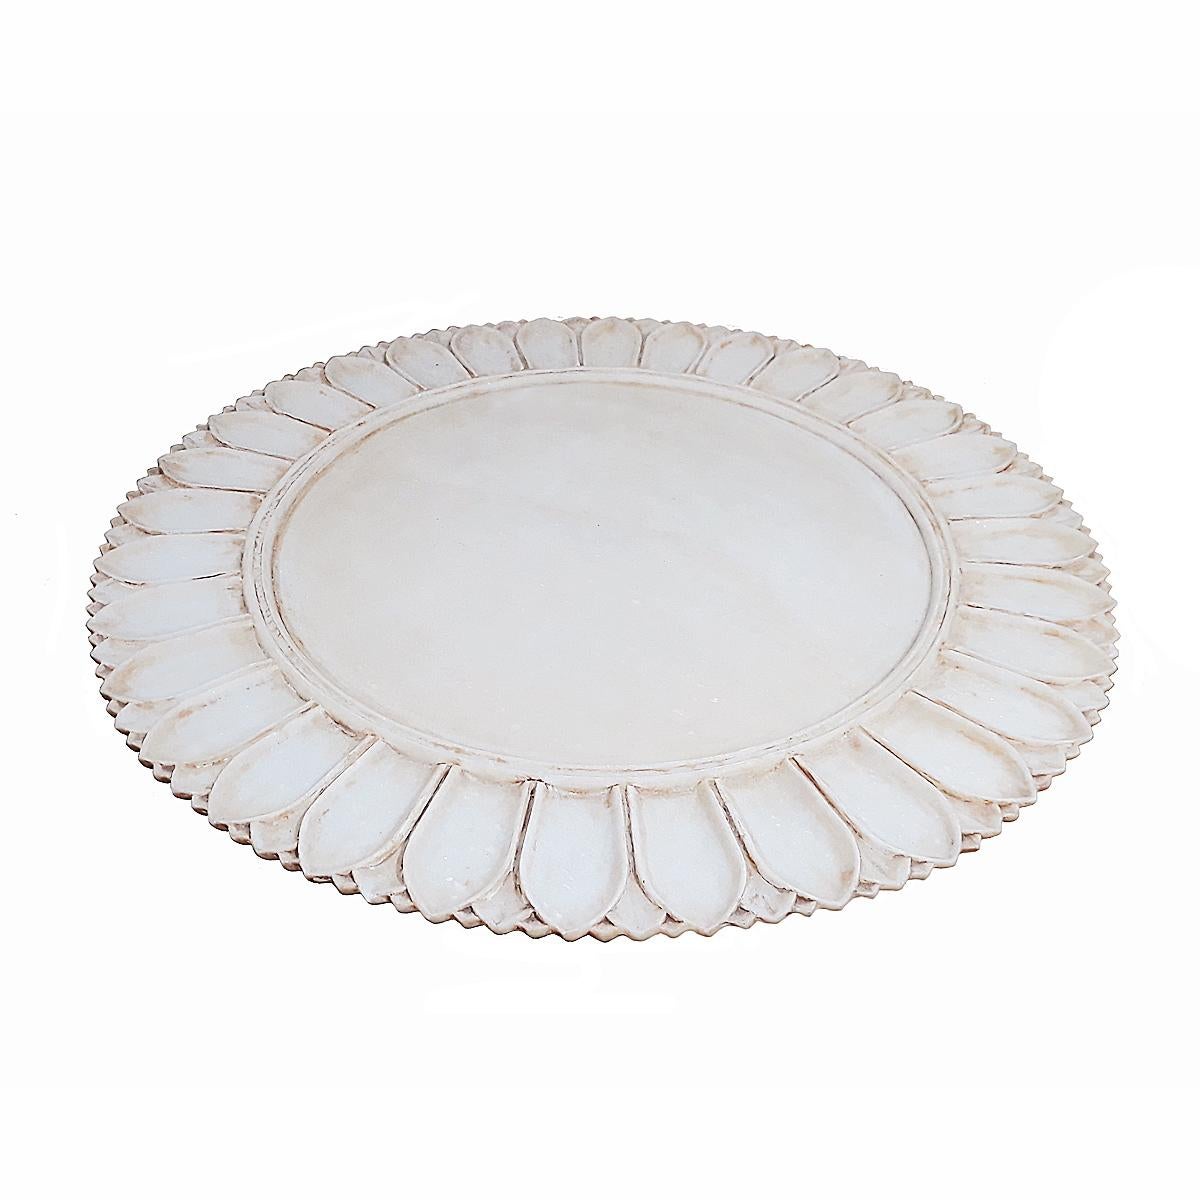 A superb Indian Marble plate, circa 1970-1975. 

Hand-carved from a single piece of marble. Natural patina conferred by age. Beautifully carved borders in a leaf pattern and concentric circles, defining a smooth center. Can be used as a server, as a